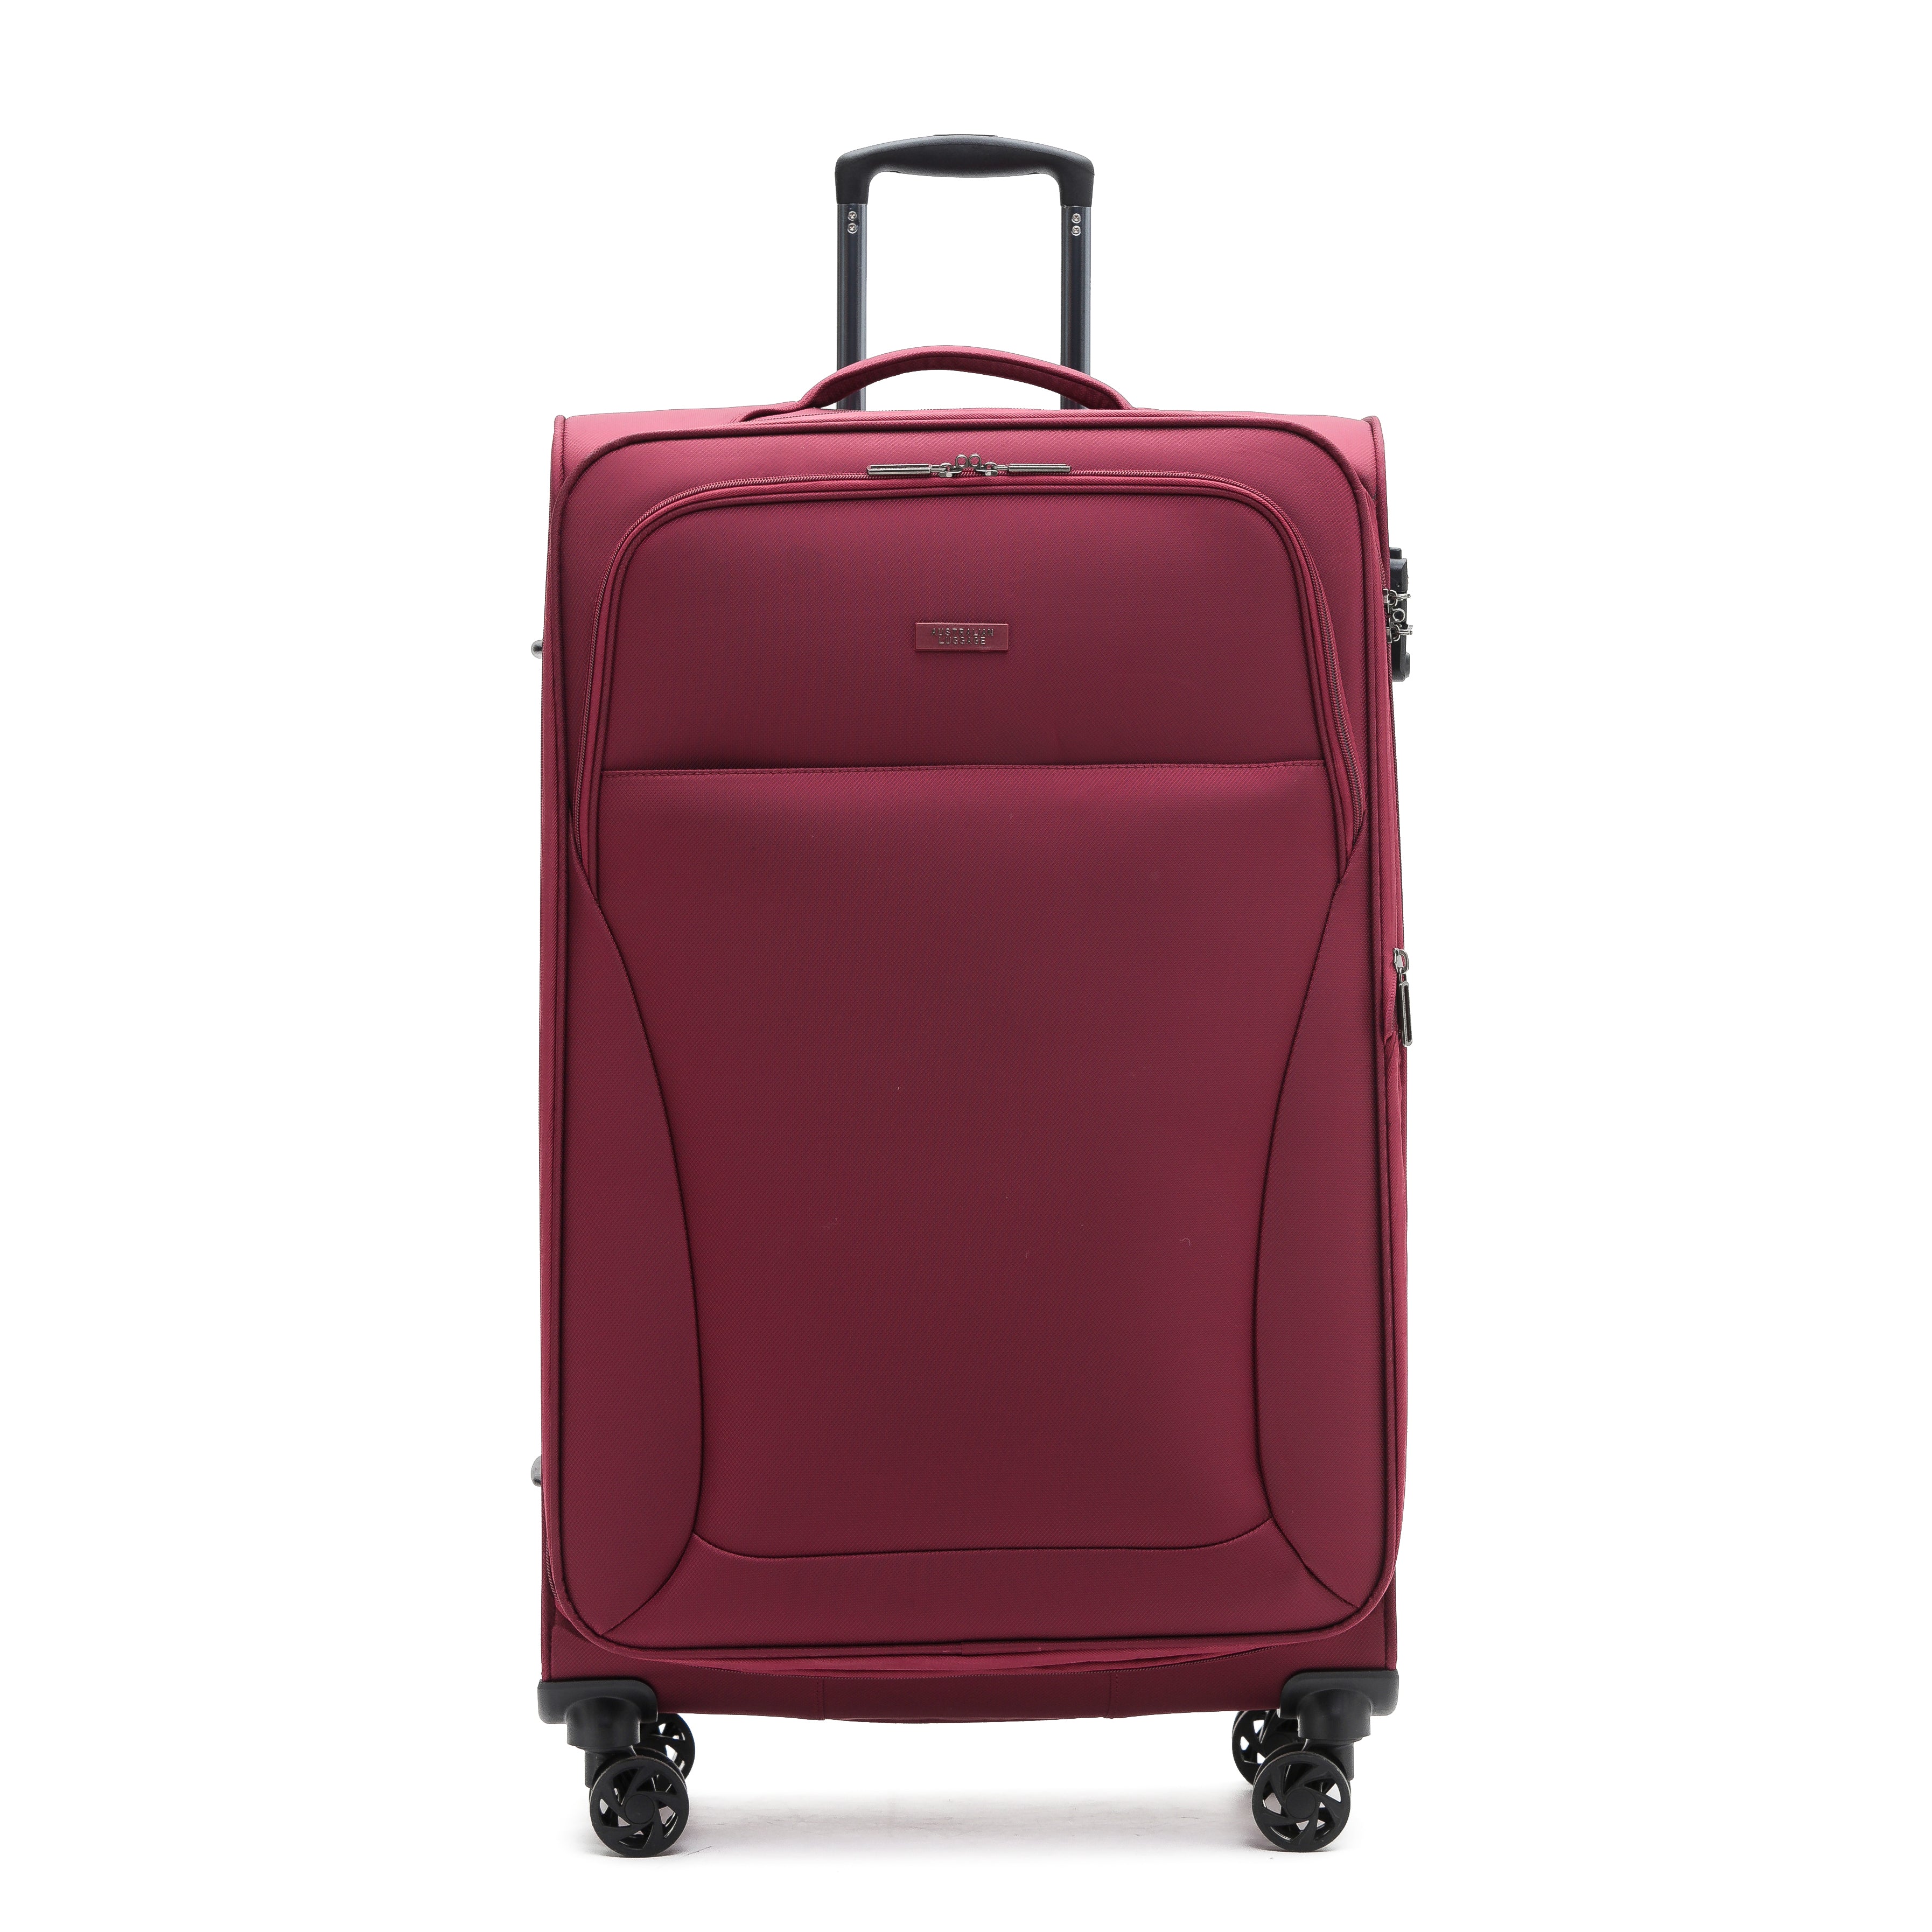 Aus Luggage - WINGS Set of 3 Suitcases - Wine-11